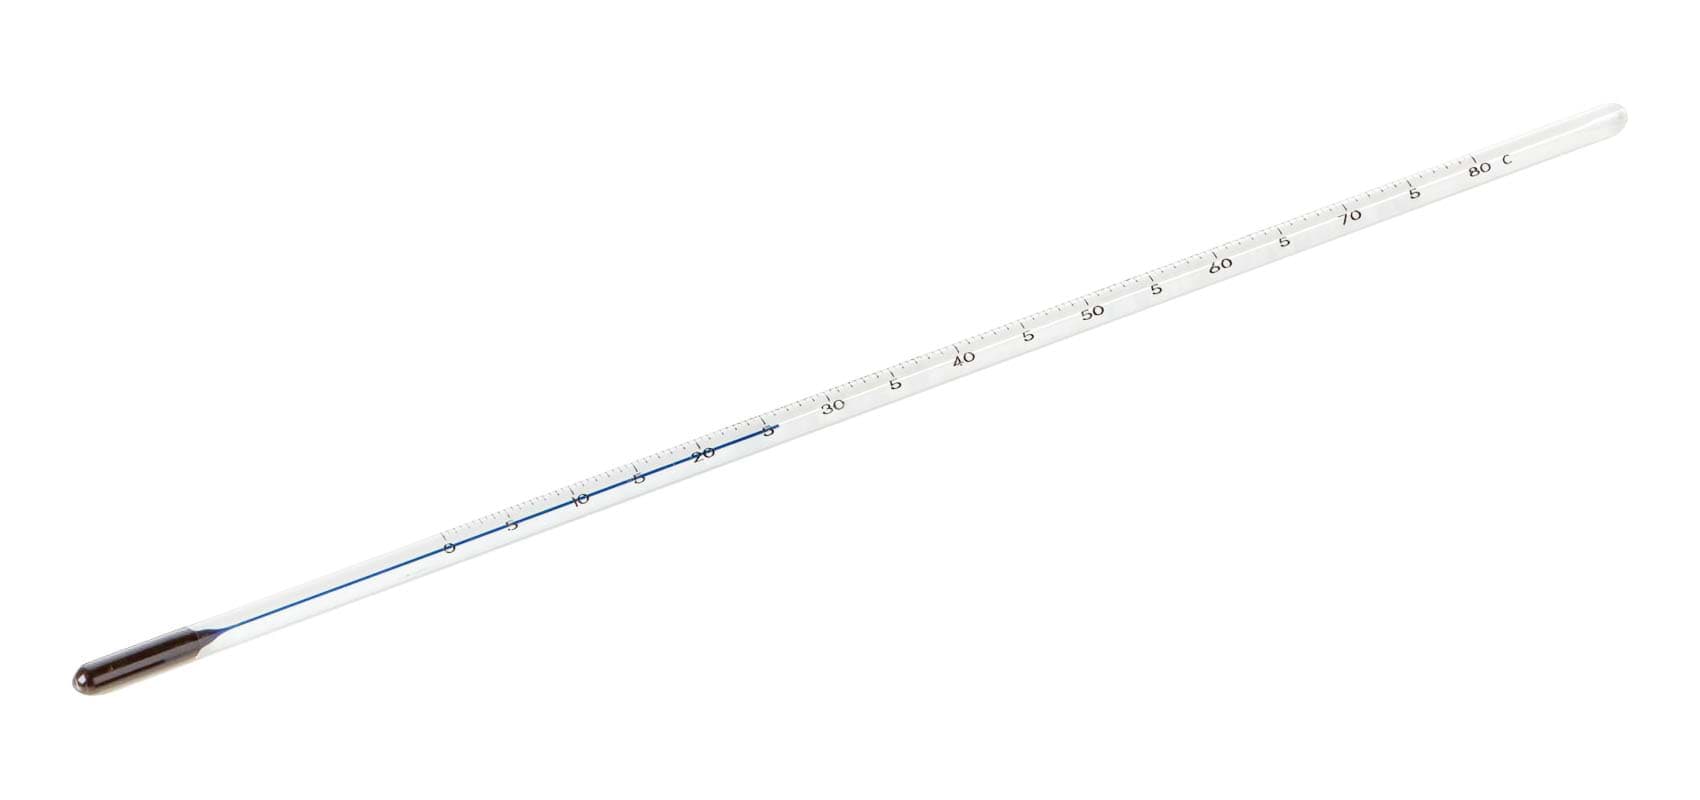 ERTCO® Wax Melting Point Mercury Filled Thermometer, 380 mm L, ASTM Number  14C, 38 to 82°C